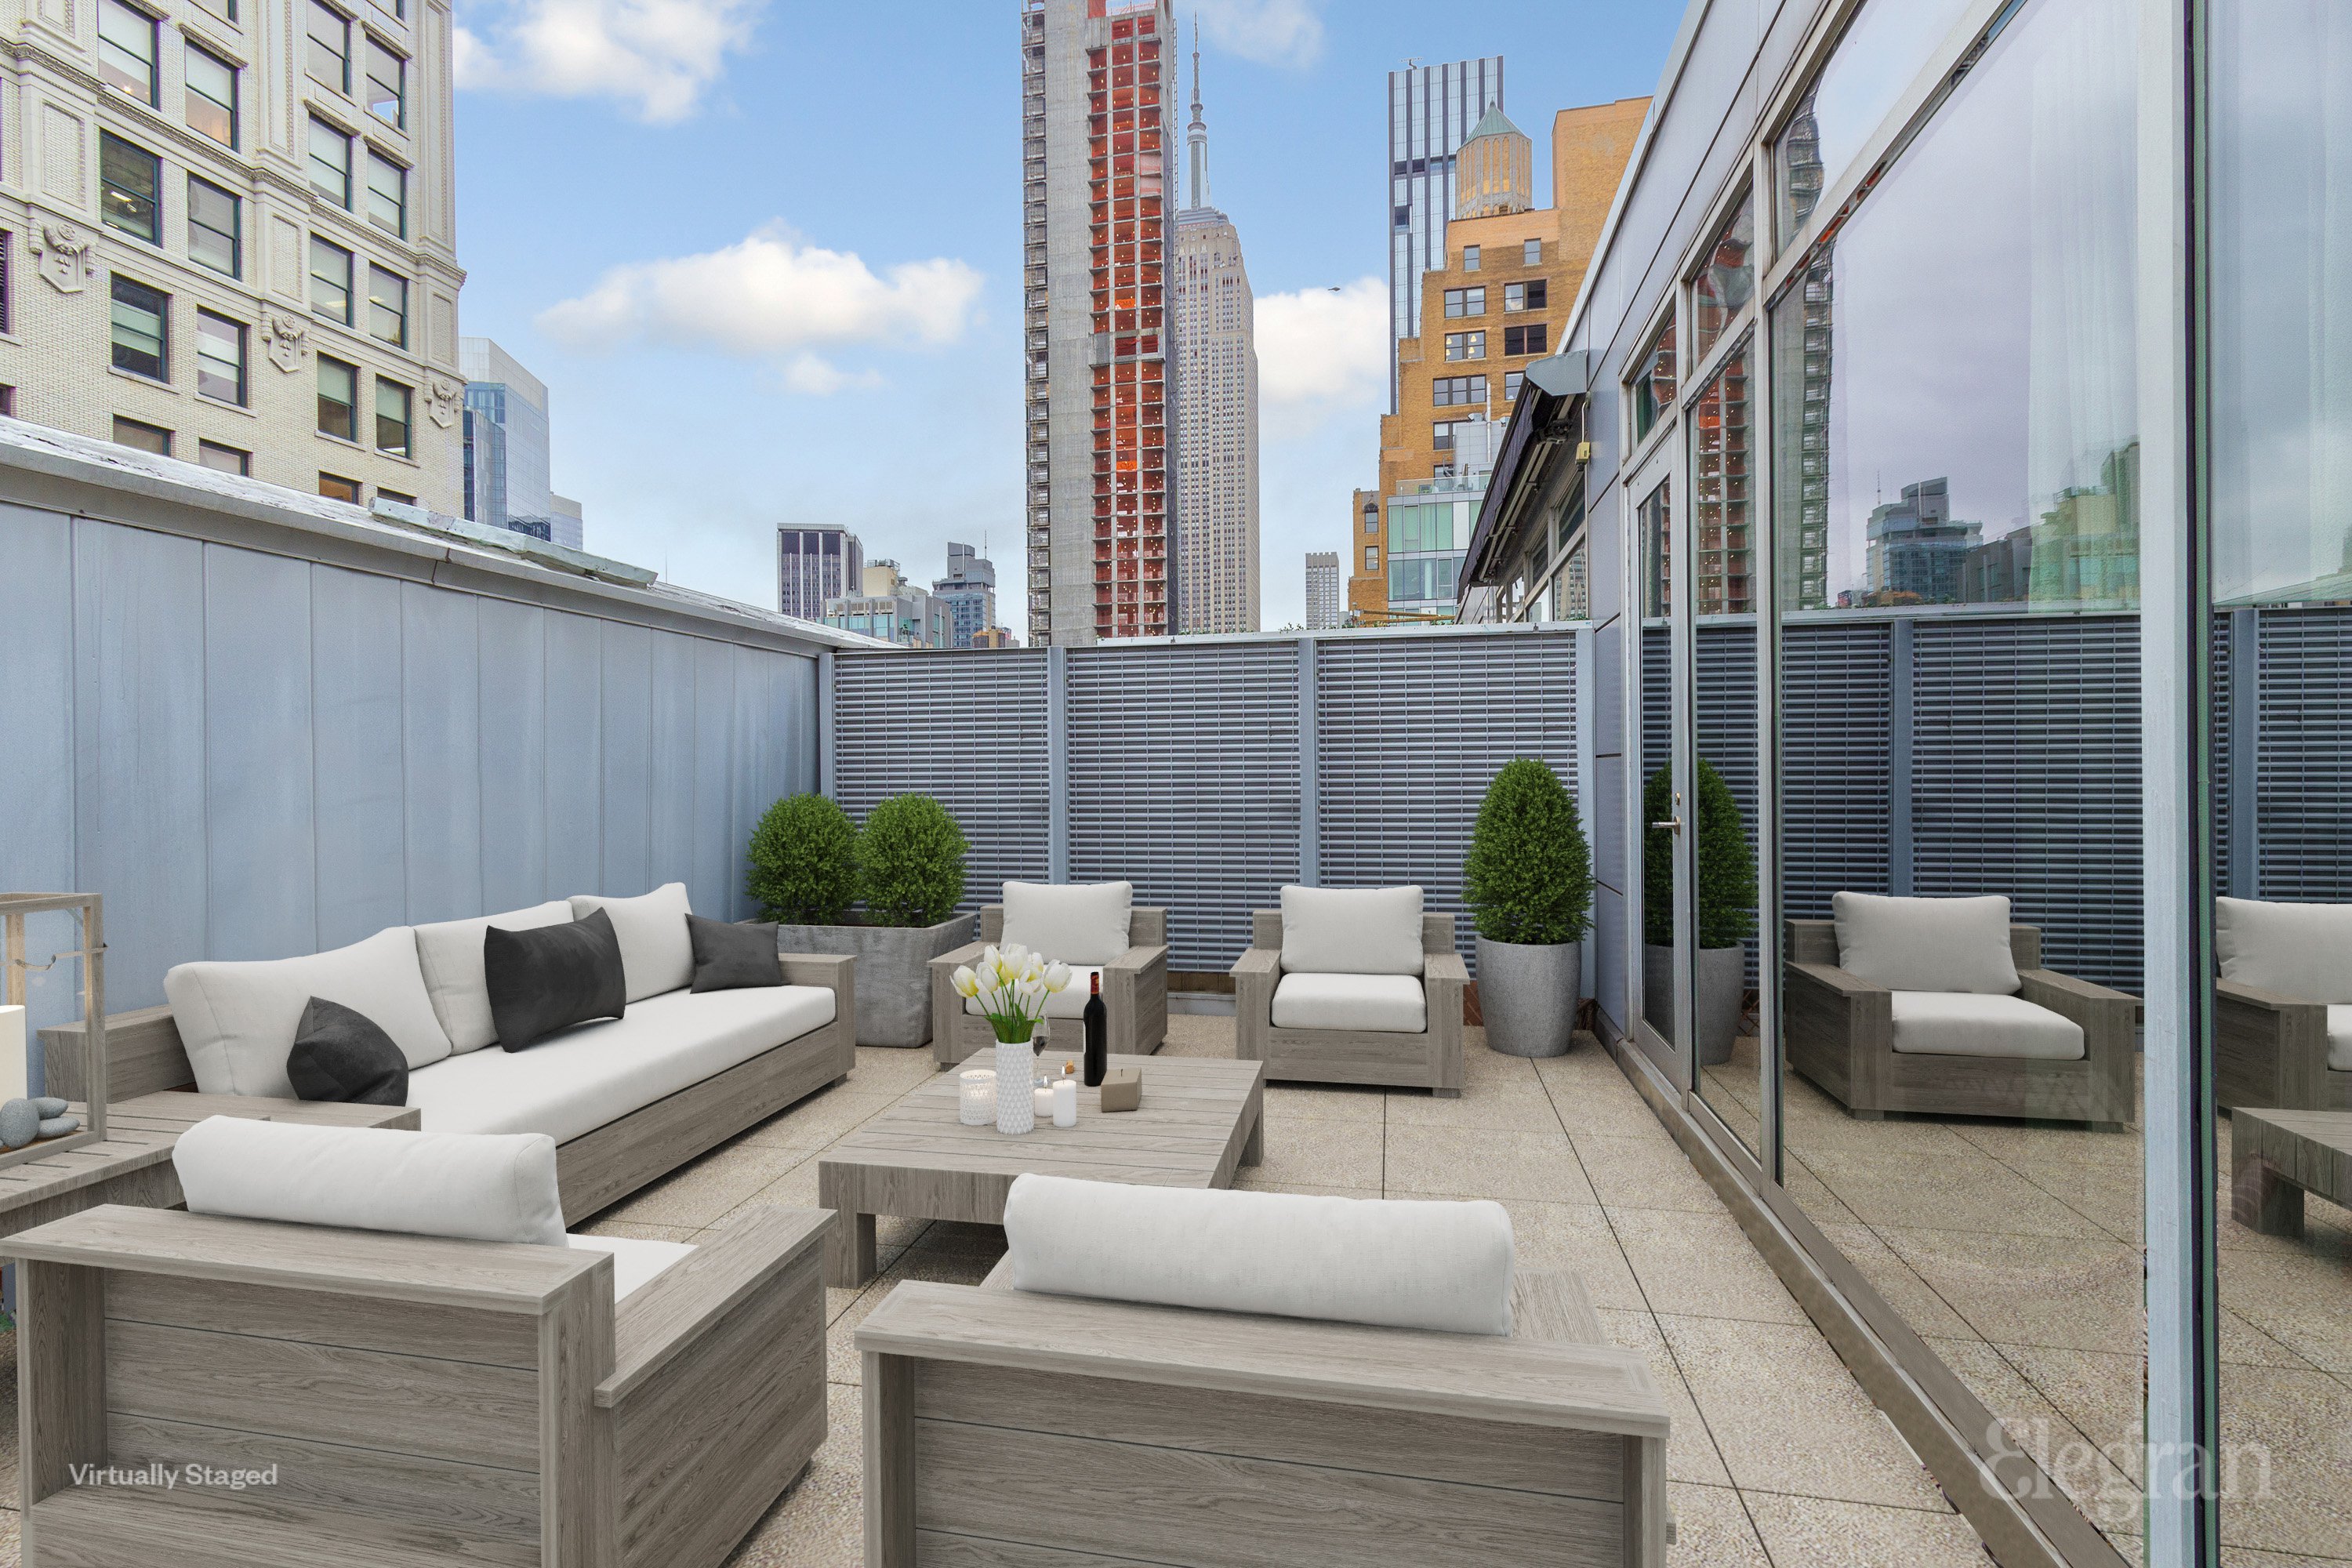 225 5th Avenue Ph-K, Nomad, Downtown, NYC - 2 Bedrooms  
2 Bathrooms  
5 Rooms - 